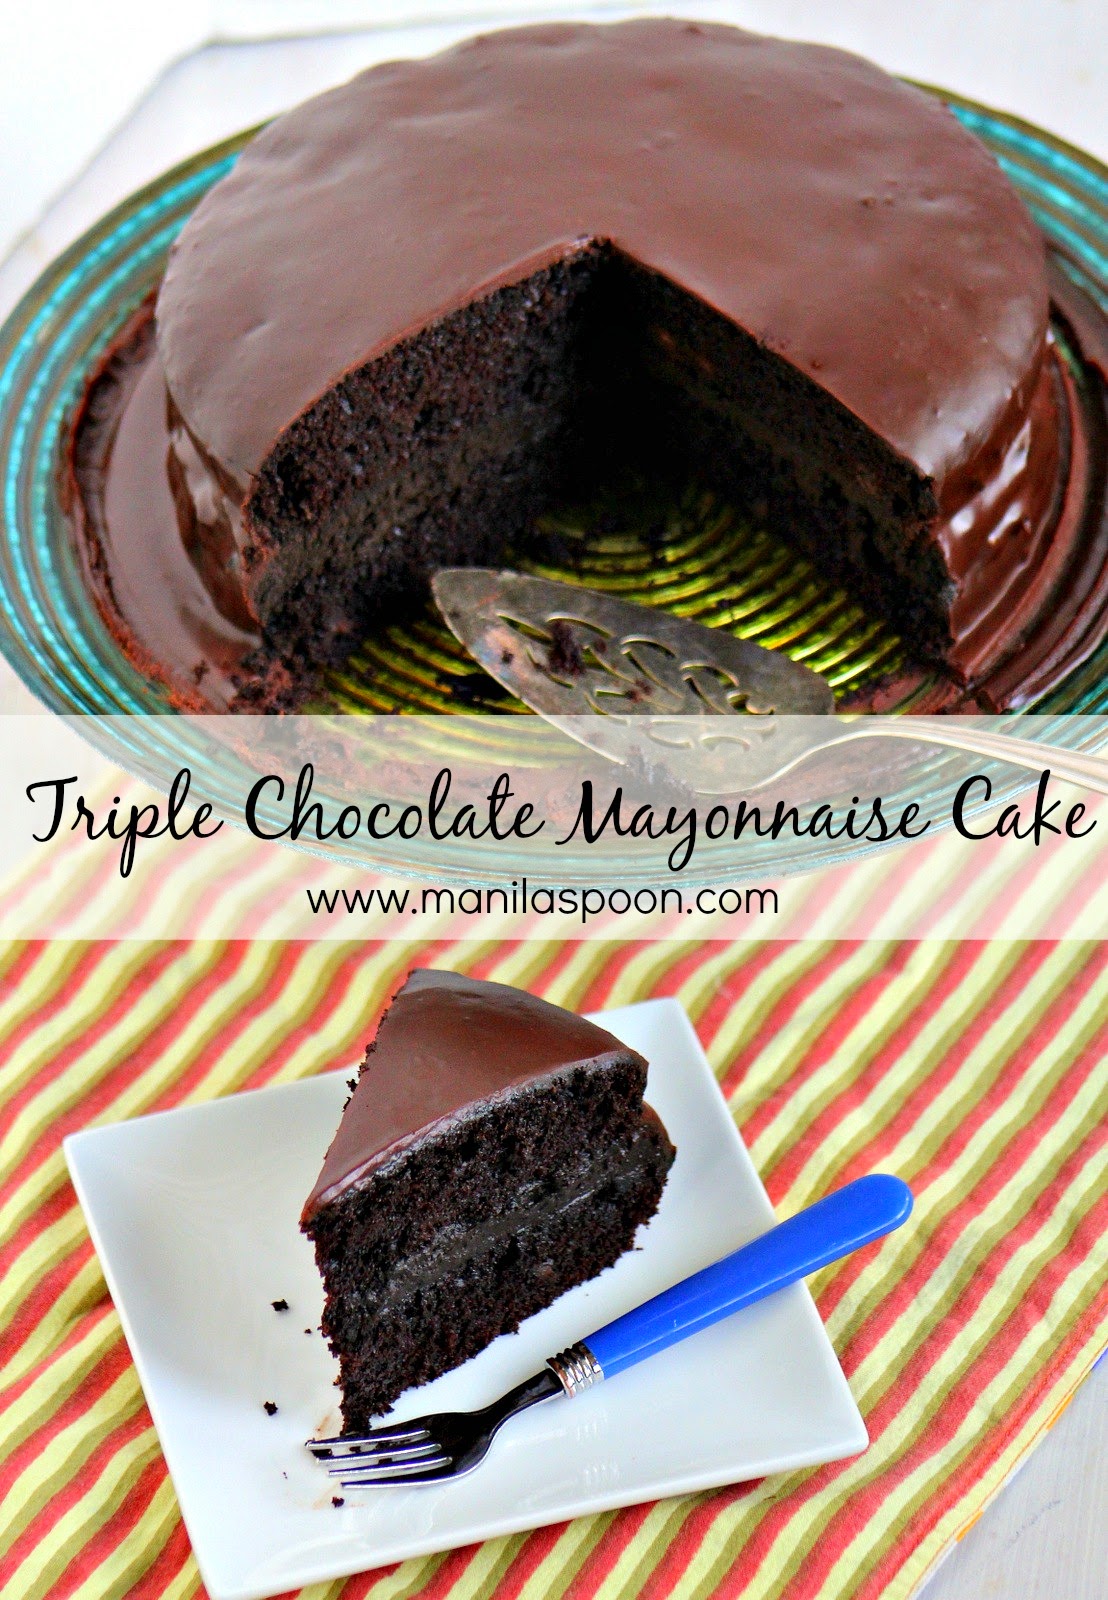 The secret ingredient that makes this cake so moist is Mayonnaise! Add 3 kinds of chocolate and it's chocolate indulgence at its highest. #chocolate #mayonnaise #cake 